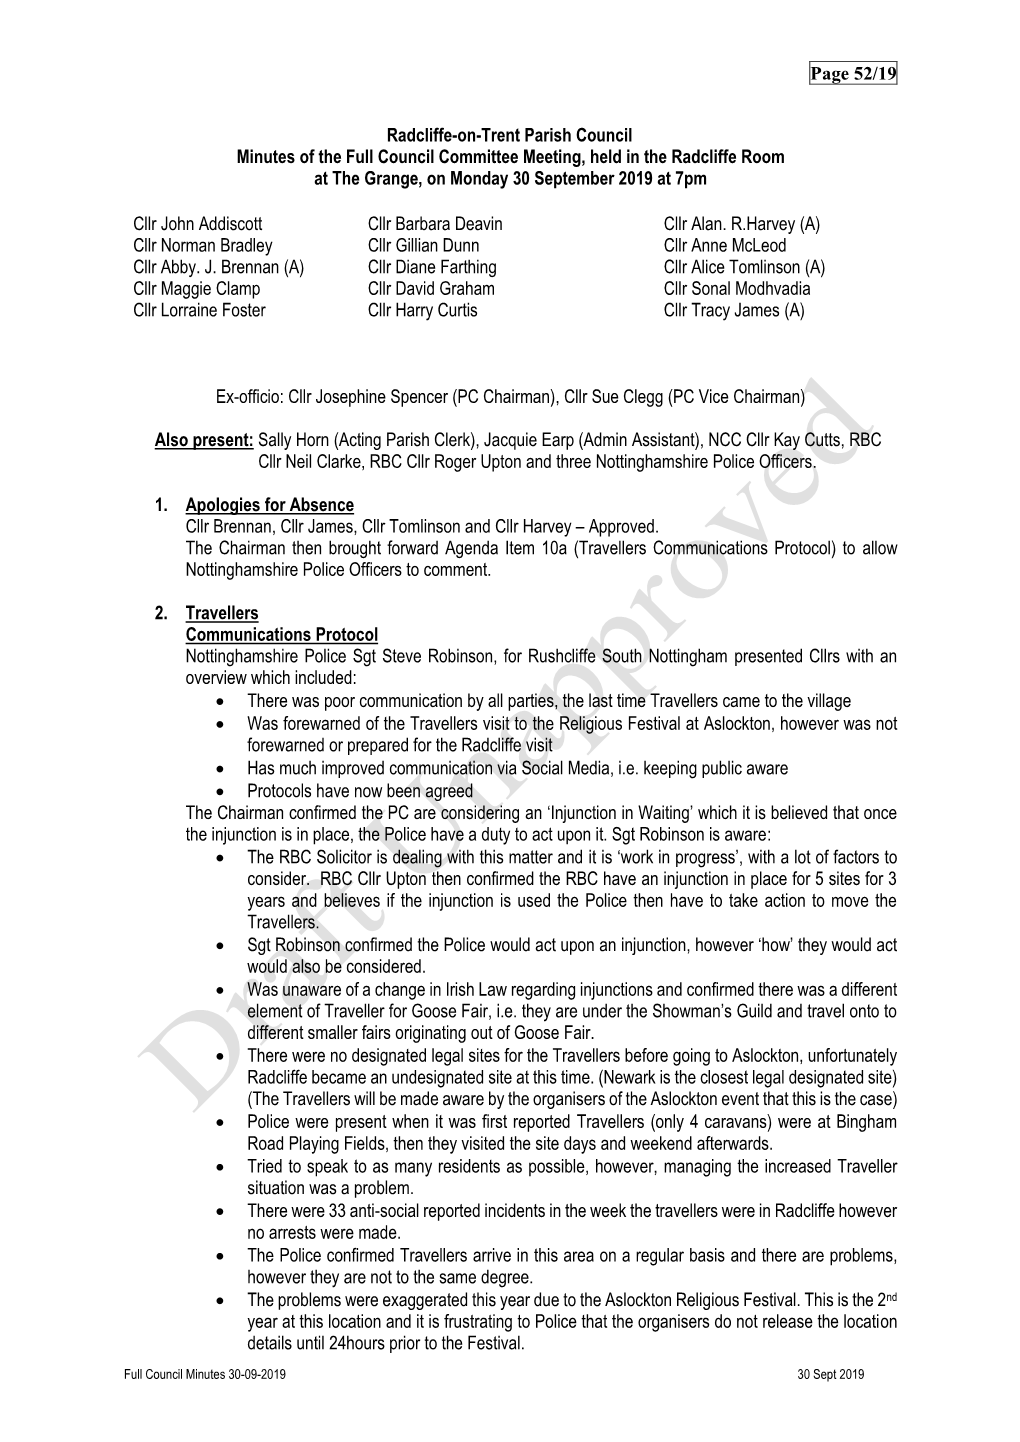 Full Council Minutes 30-09-2019 30 Sept 2019 Page 53/19